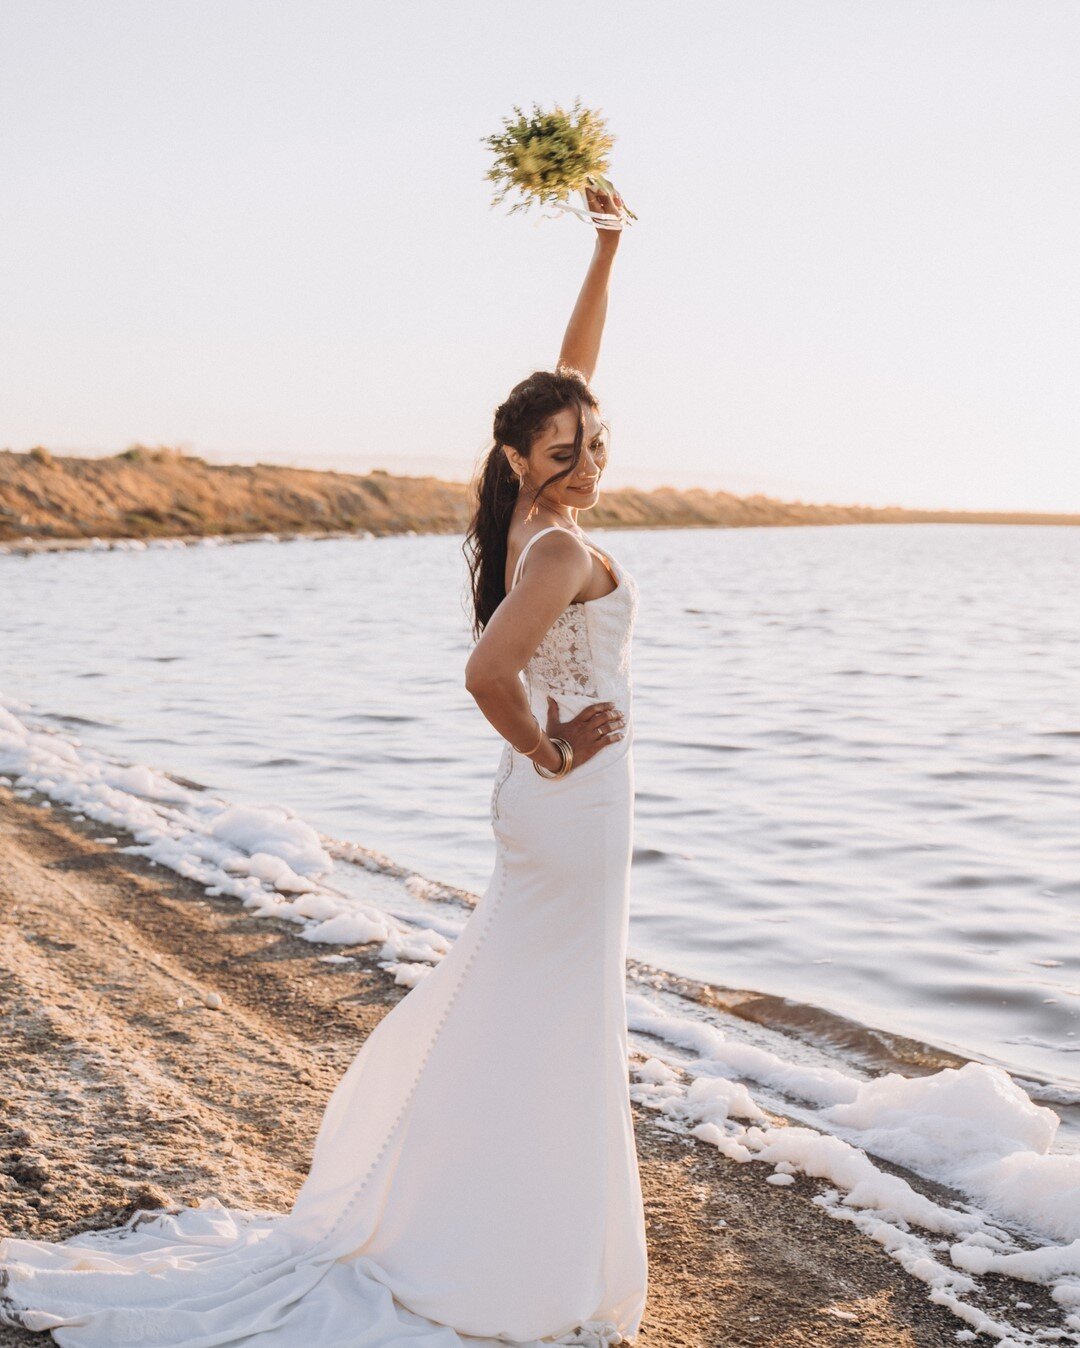 Golden hour vibes 🌅✨We&rsquo;re so excited about this shoot we couldn&rsquo;t help but to give you a proper sneak peek! Shot at the beautiful Alviso Marina County Park, this styled shoot keeps it simple, letting our Yuri gown shine in all of its stu